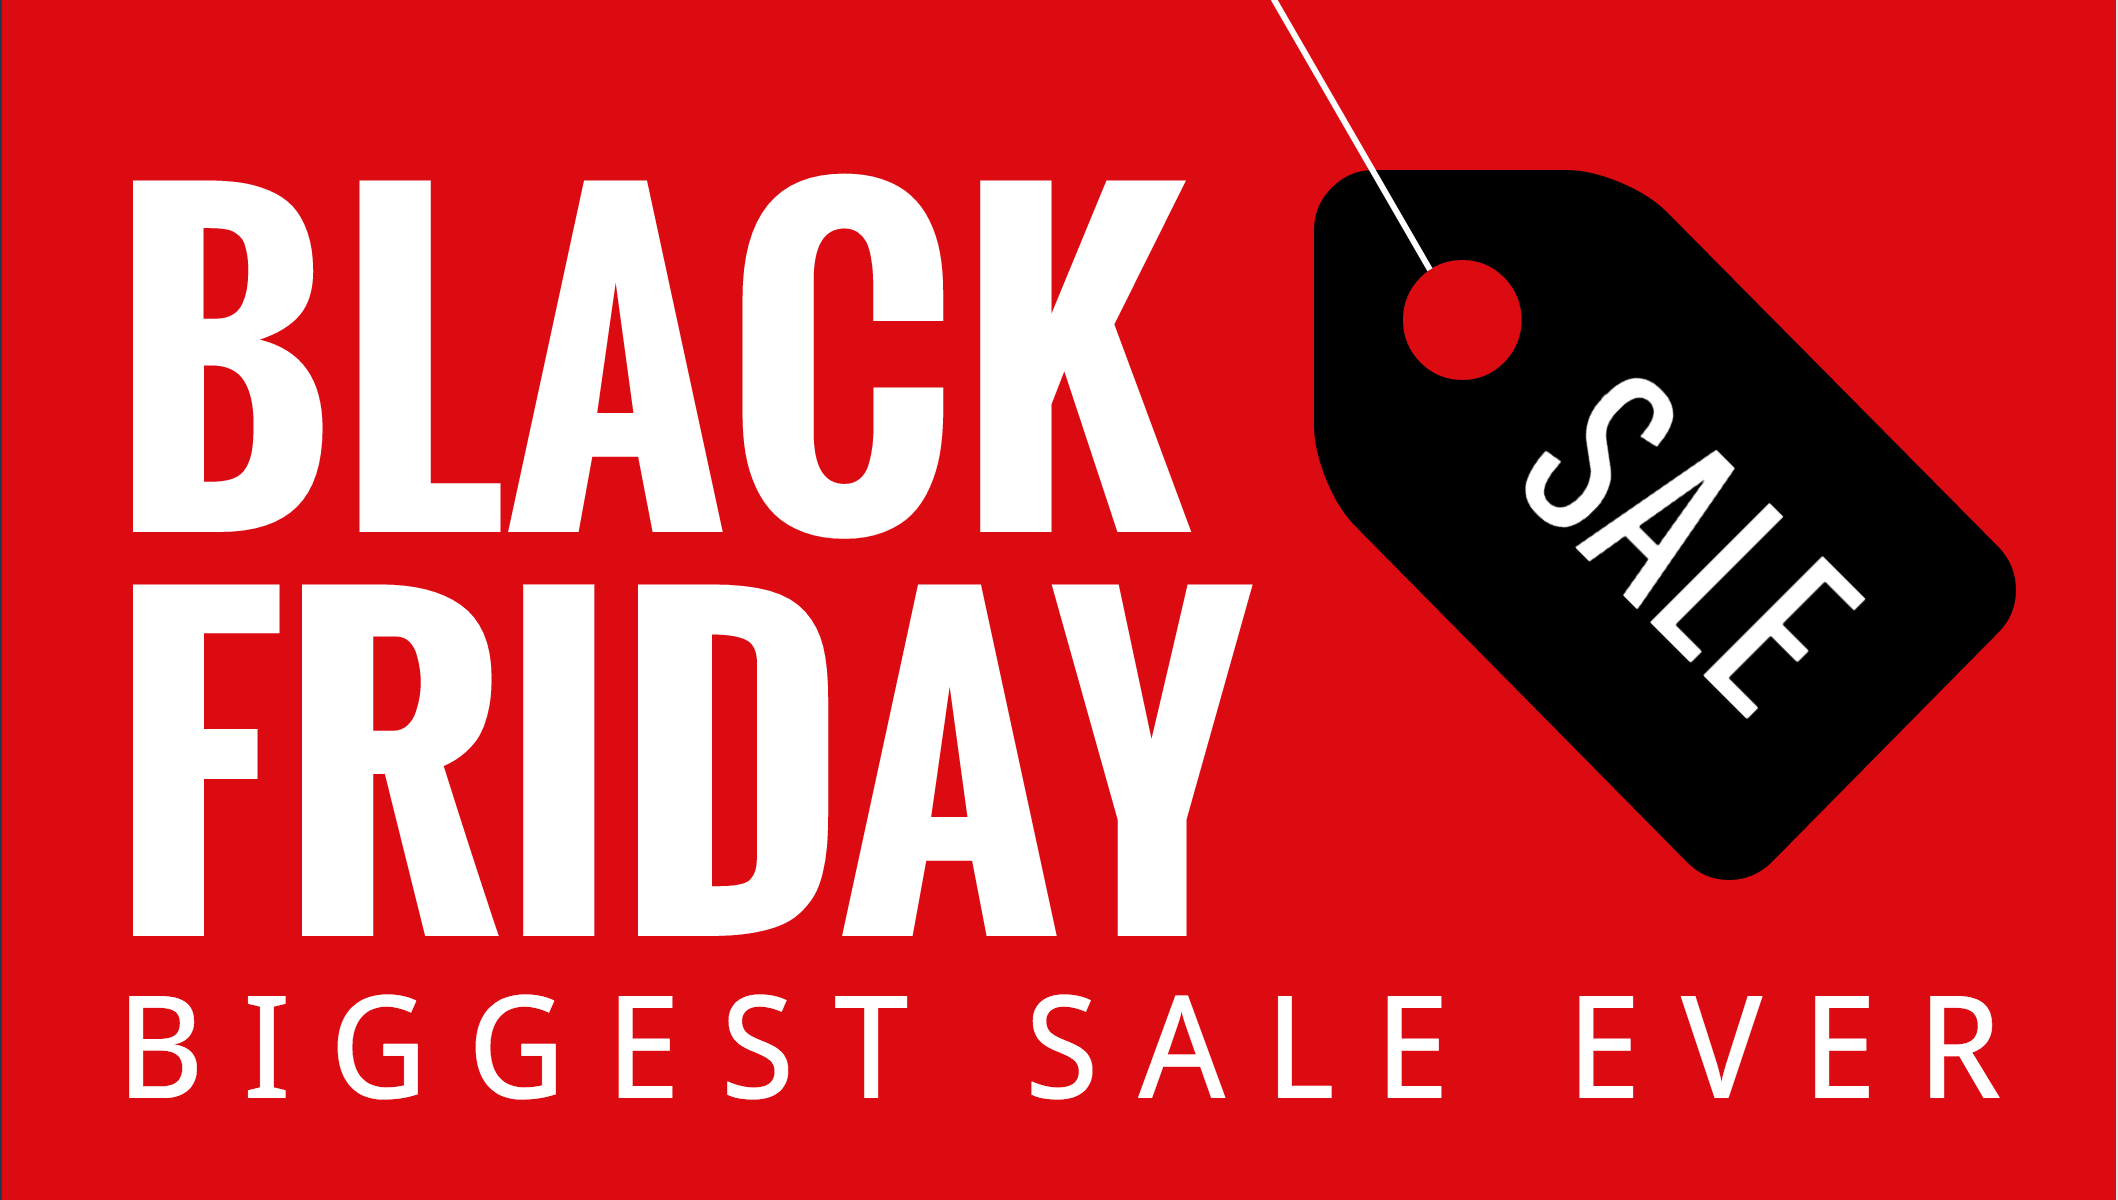 All Black Friday & Cyber Monday 2017 Sizzling Bargains in One